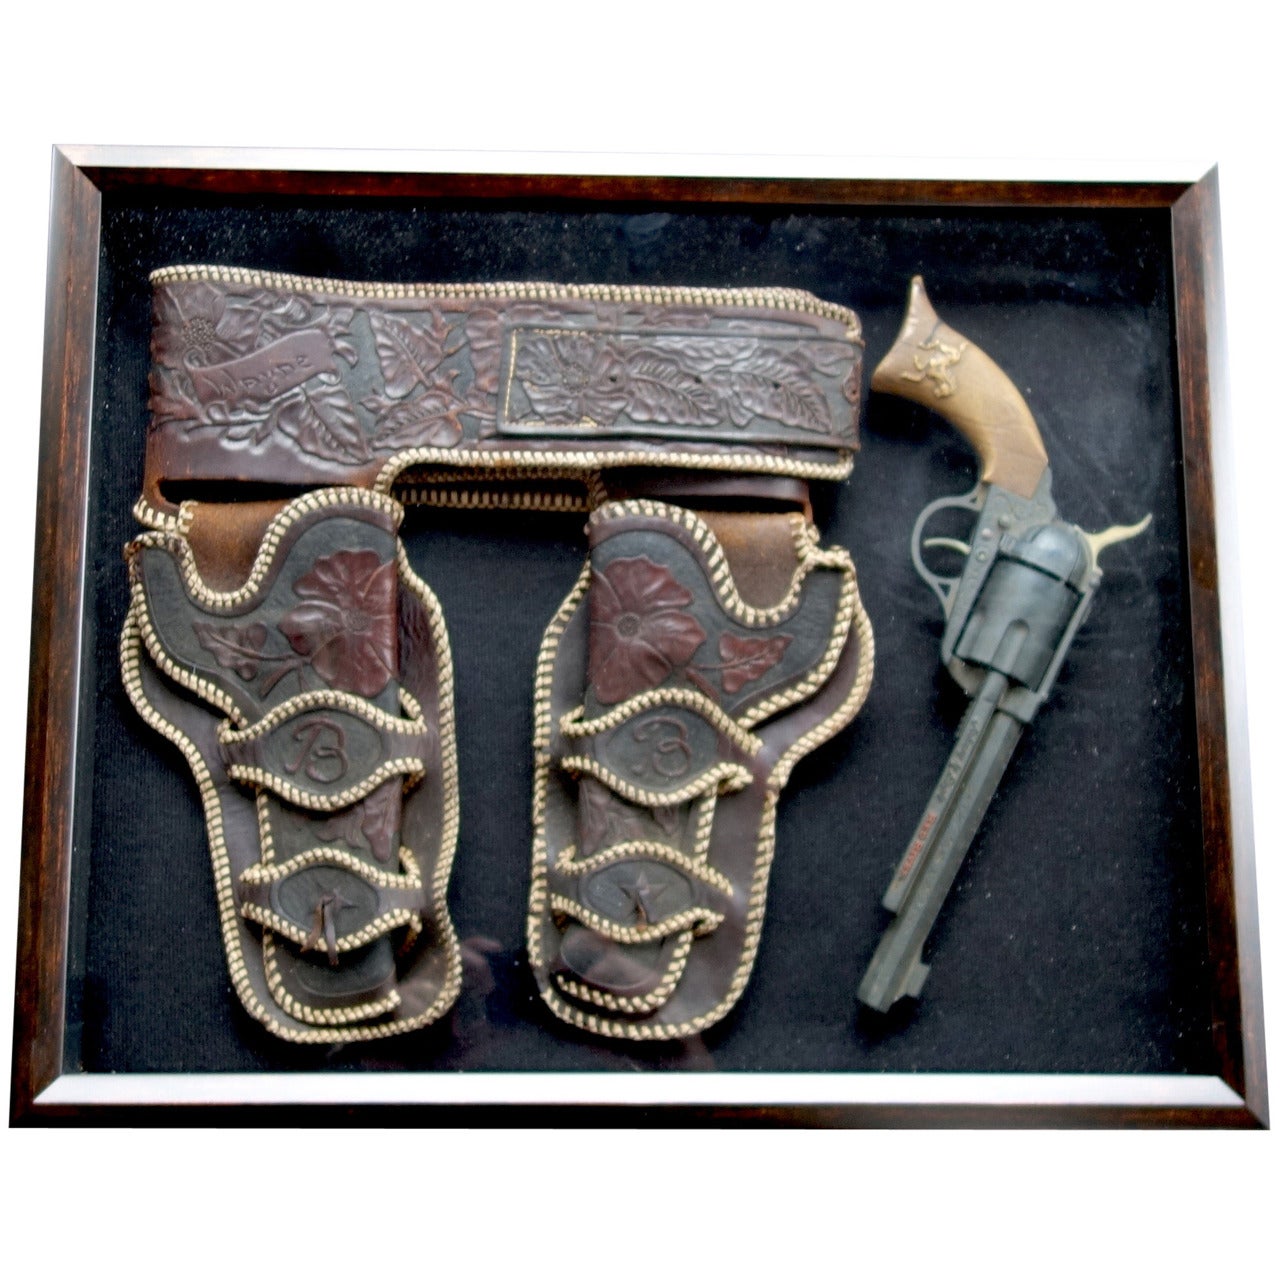 Leather Tooled Holster and Prop Gun in Shadow Box